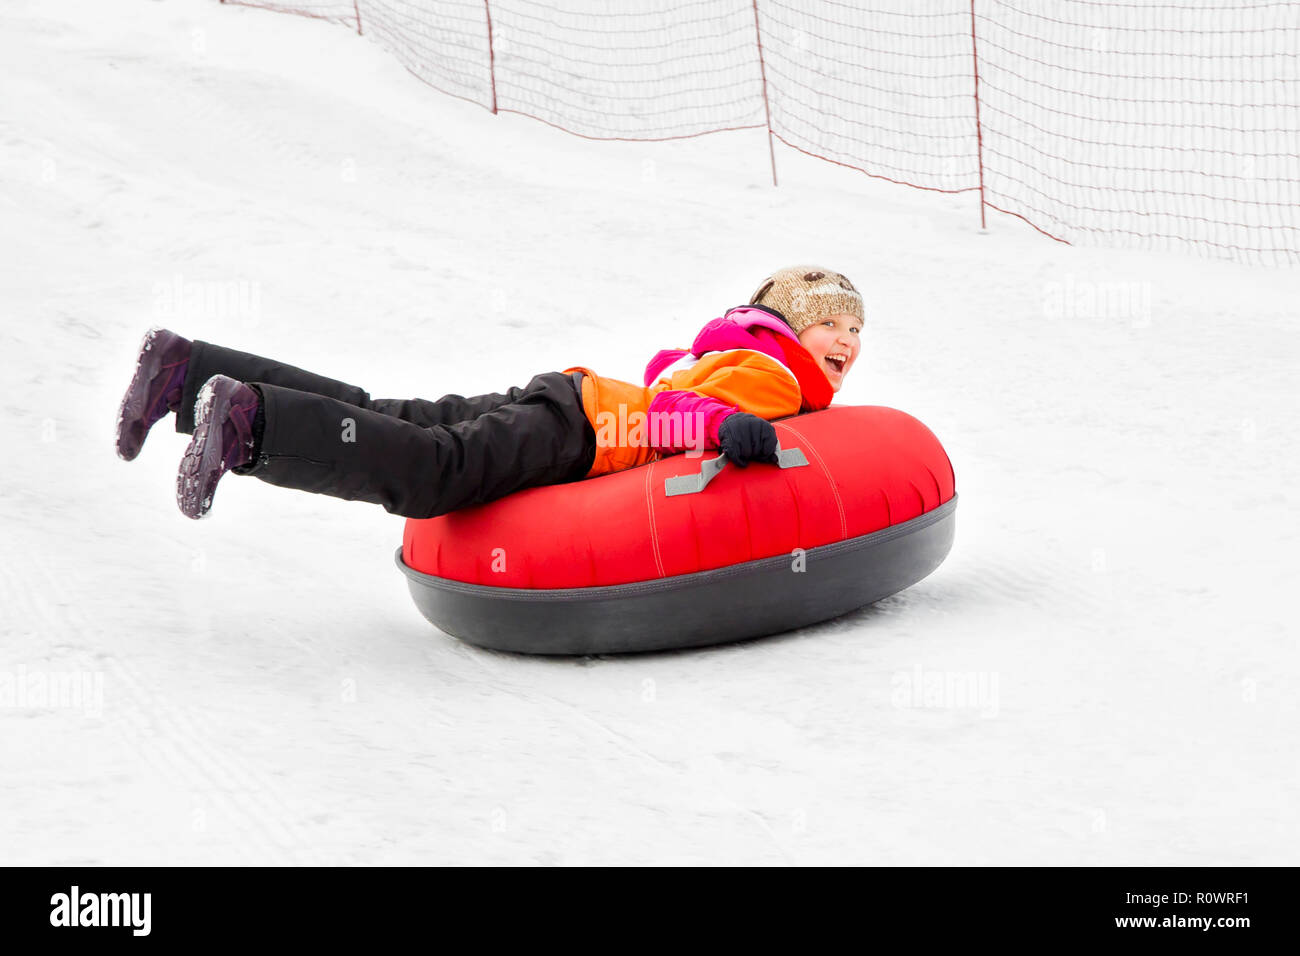 Child girl on snow tubes downhill at winter day. Stock Photo